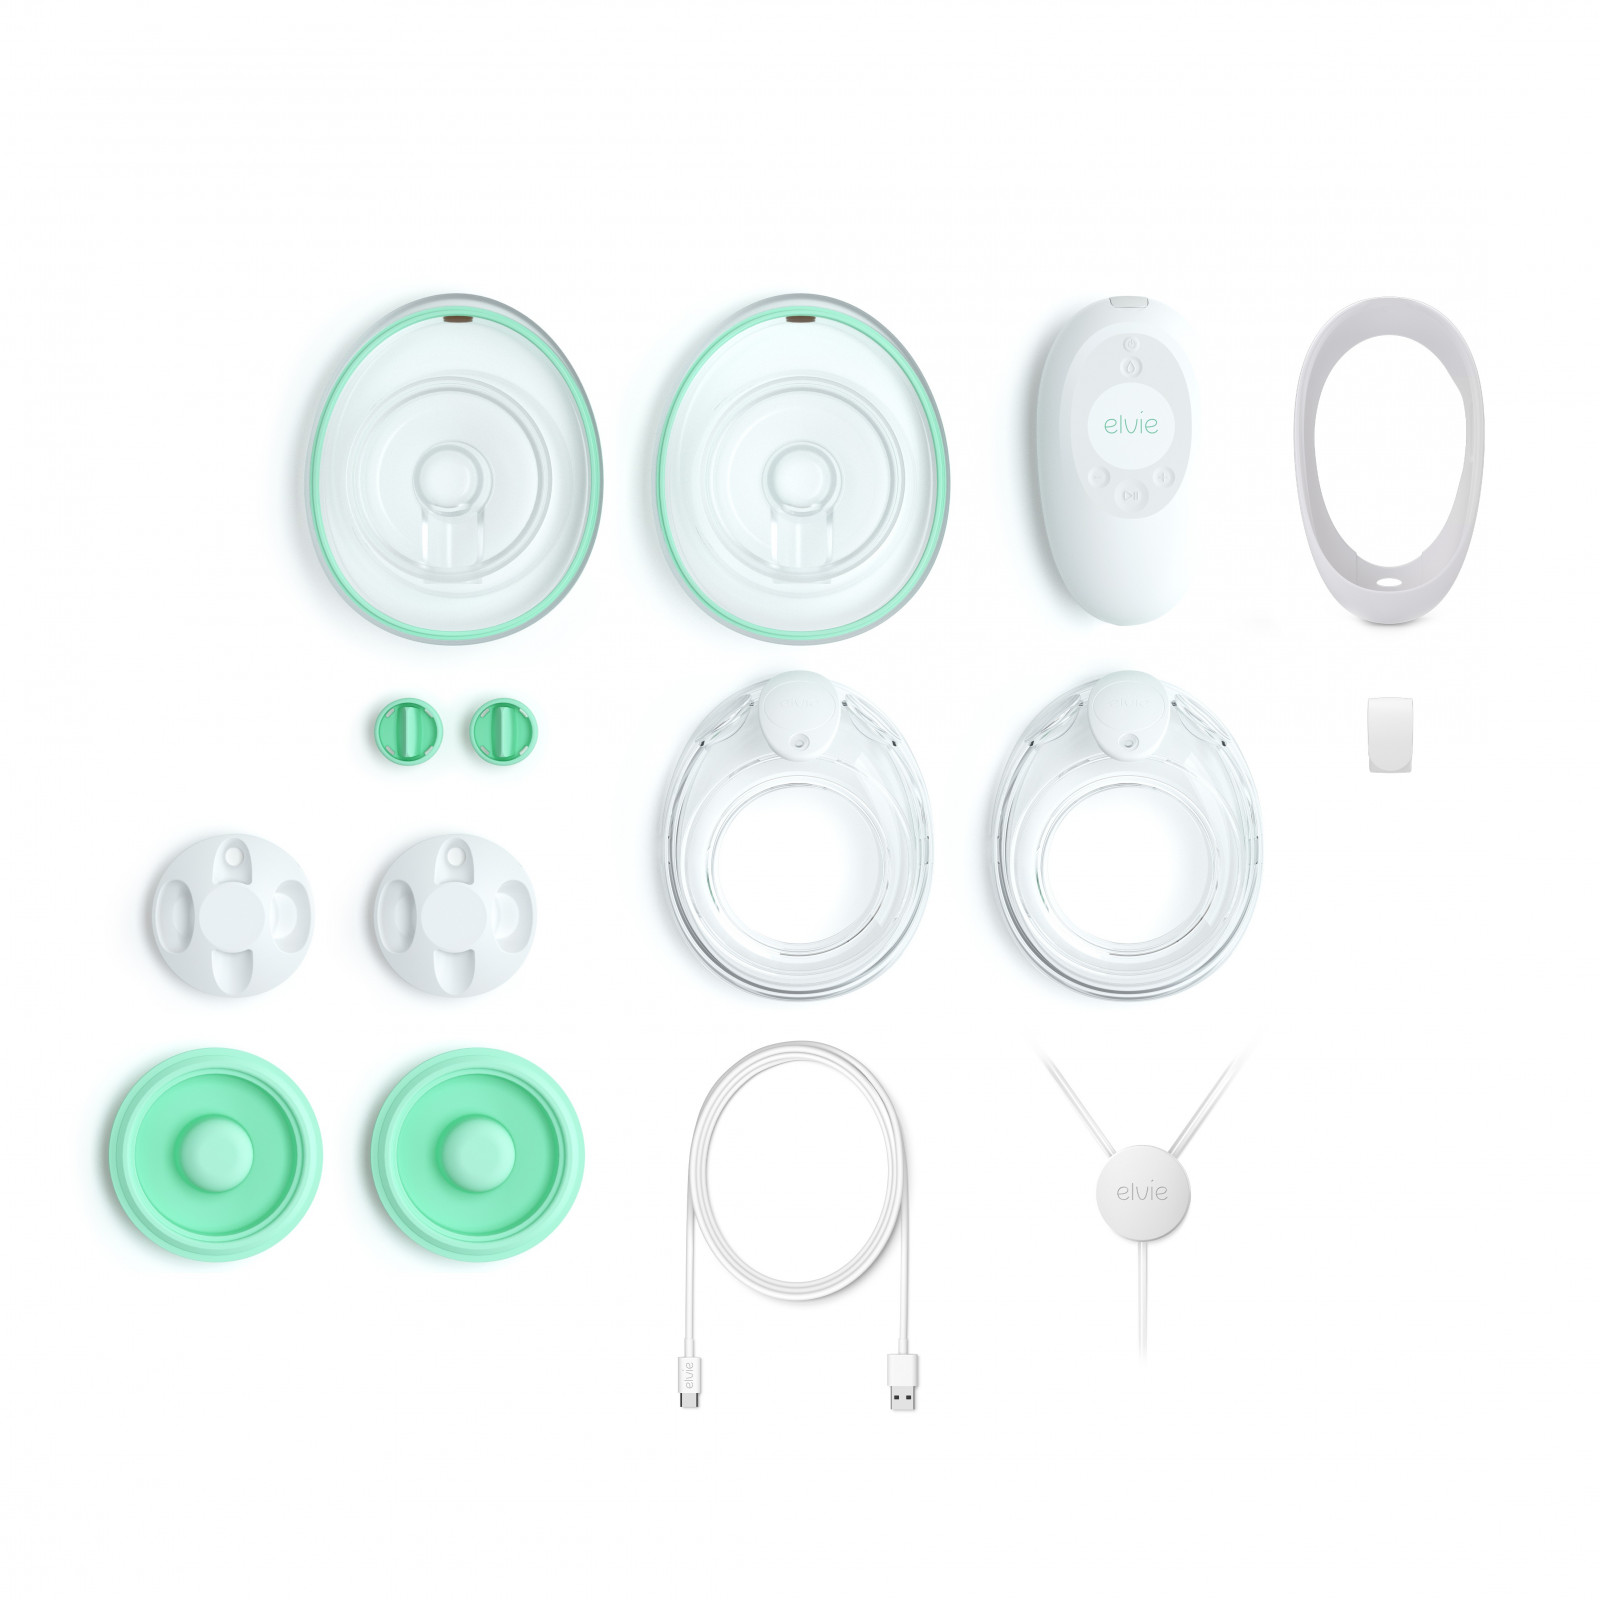 The Elvie Hands Free Breast Pump | The Care Connection